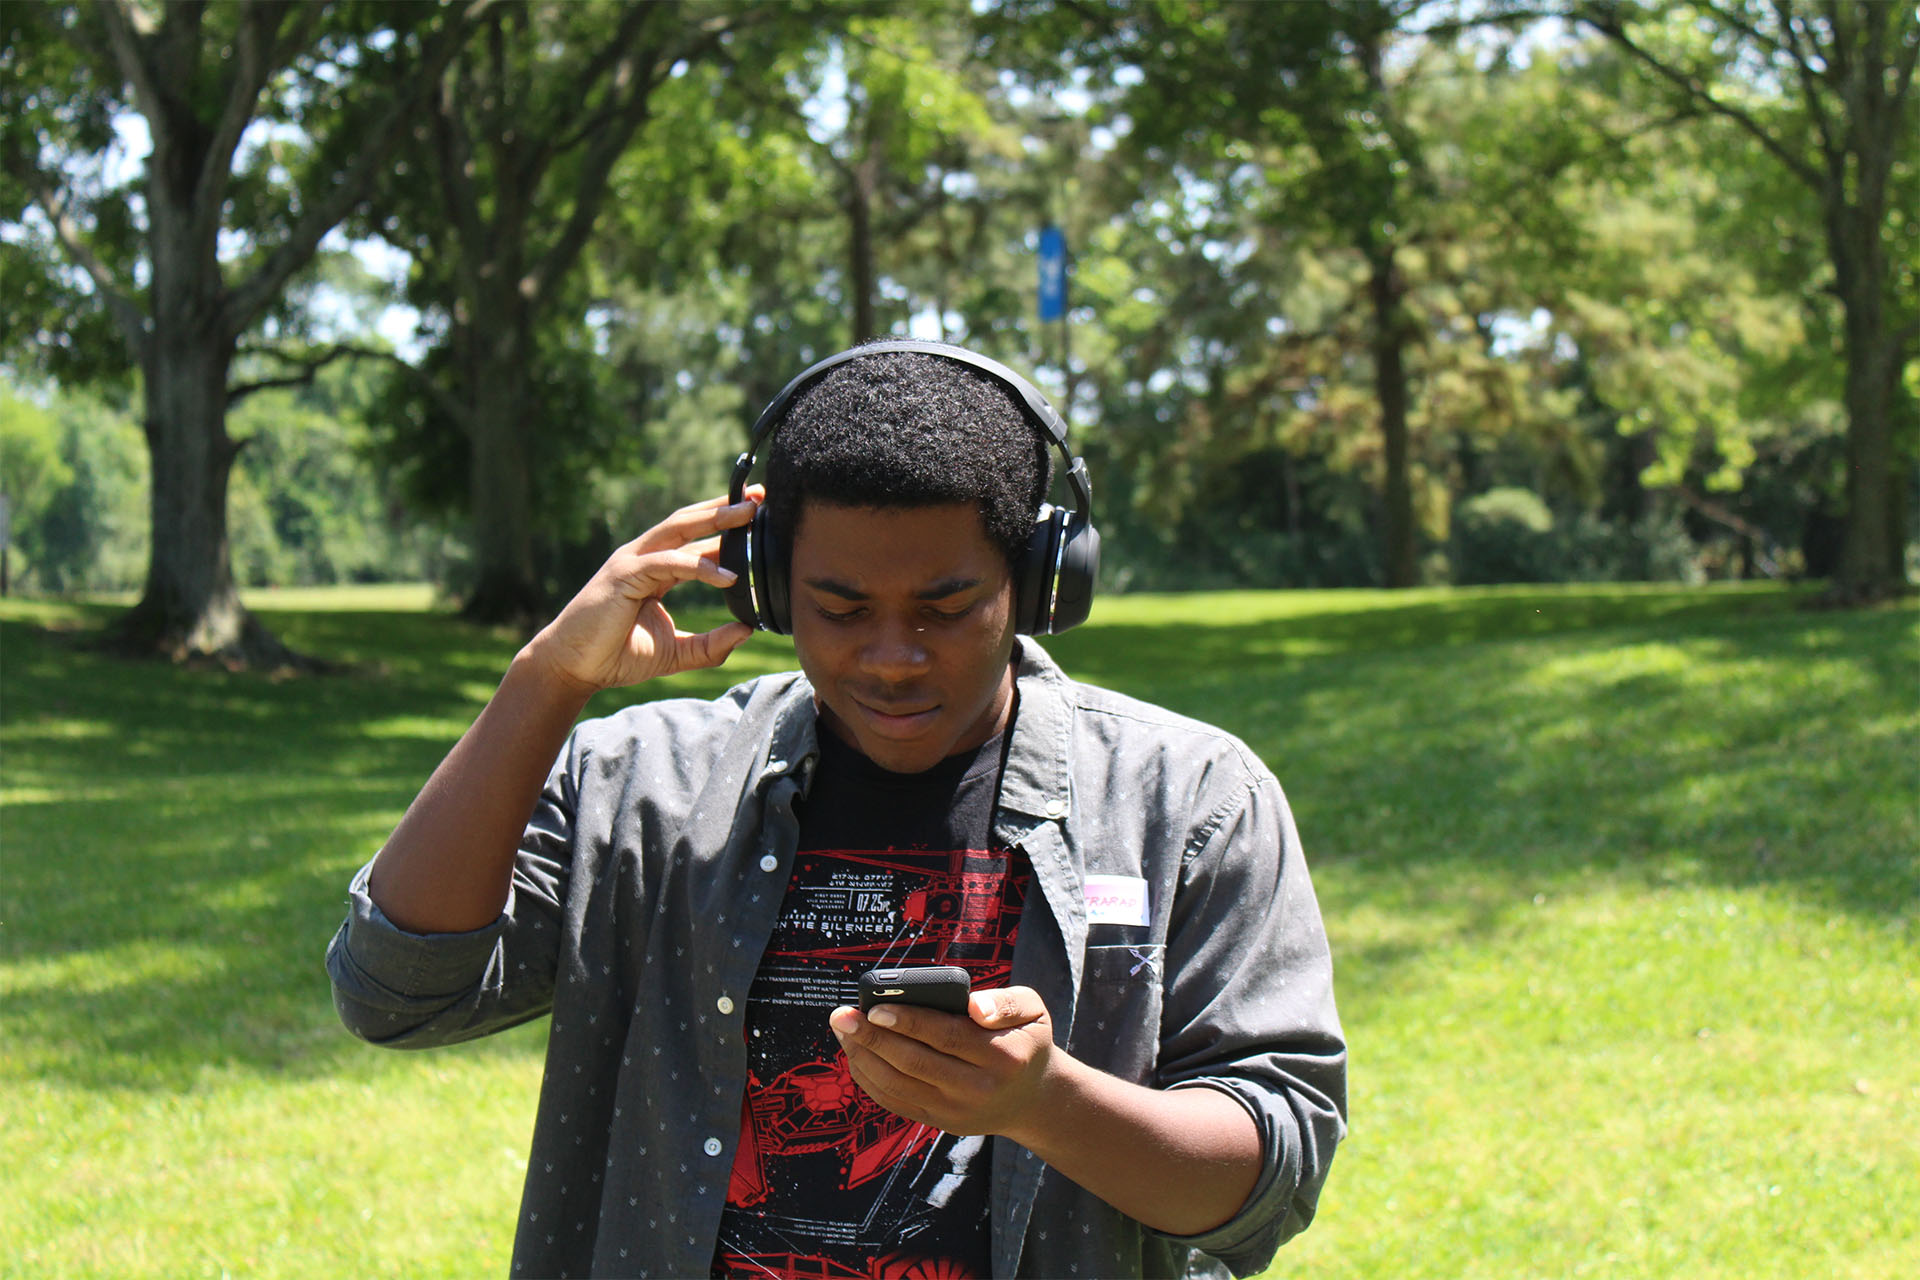 Troylon Griffin II, assistant editor, listens to 'America' by 30 Seconds to Mars. Photo by Signal reporter Justin Murphy.